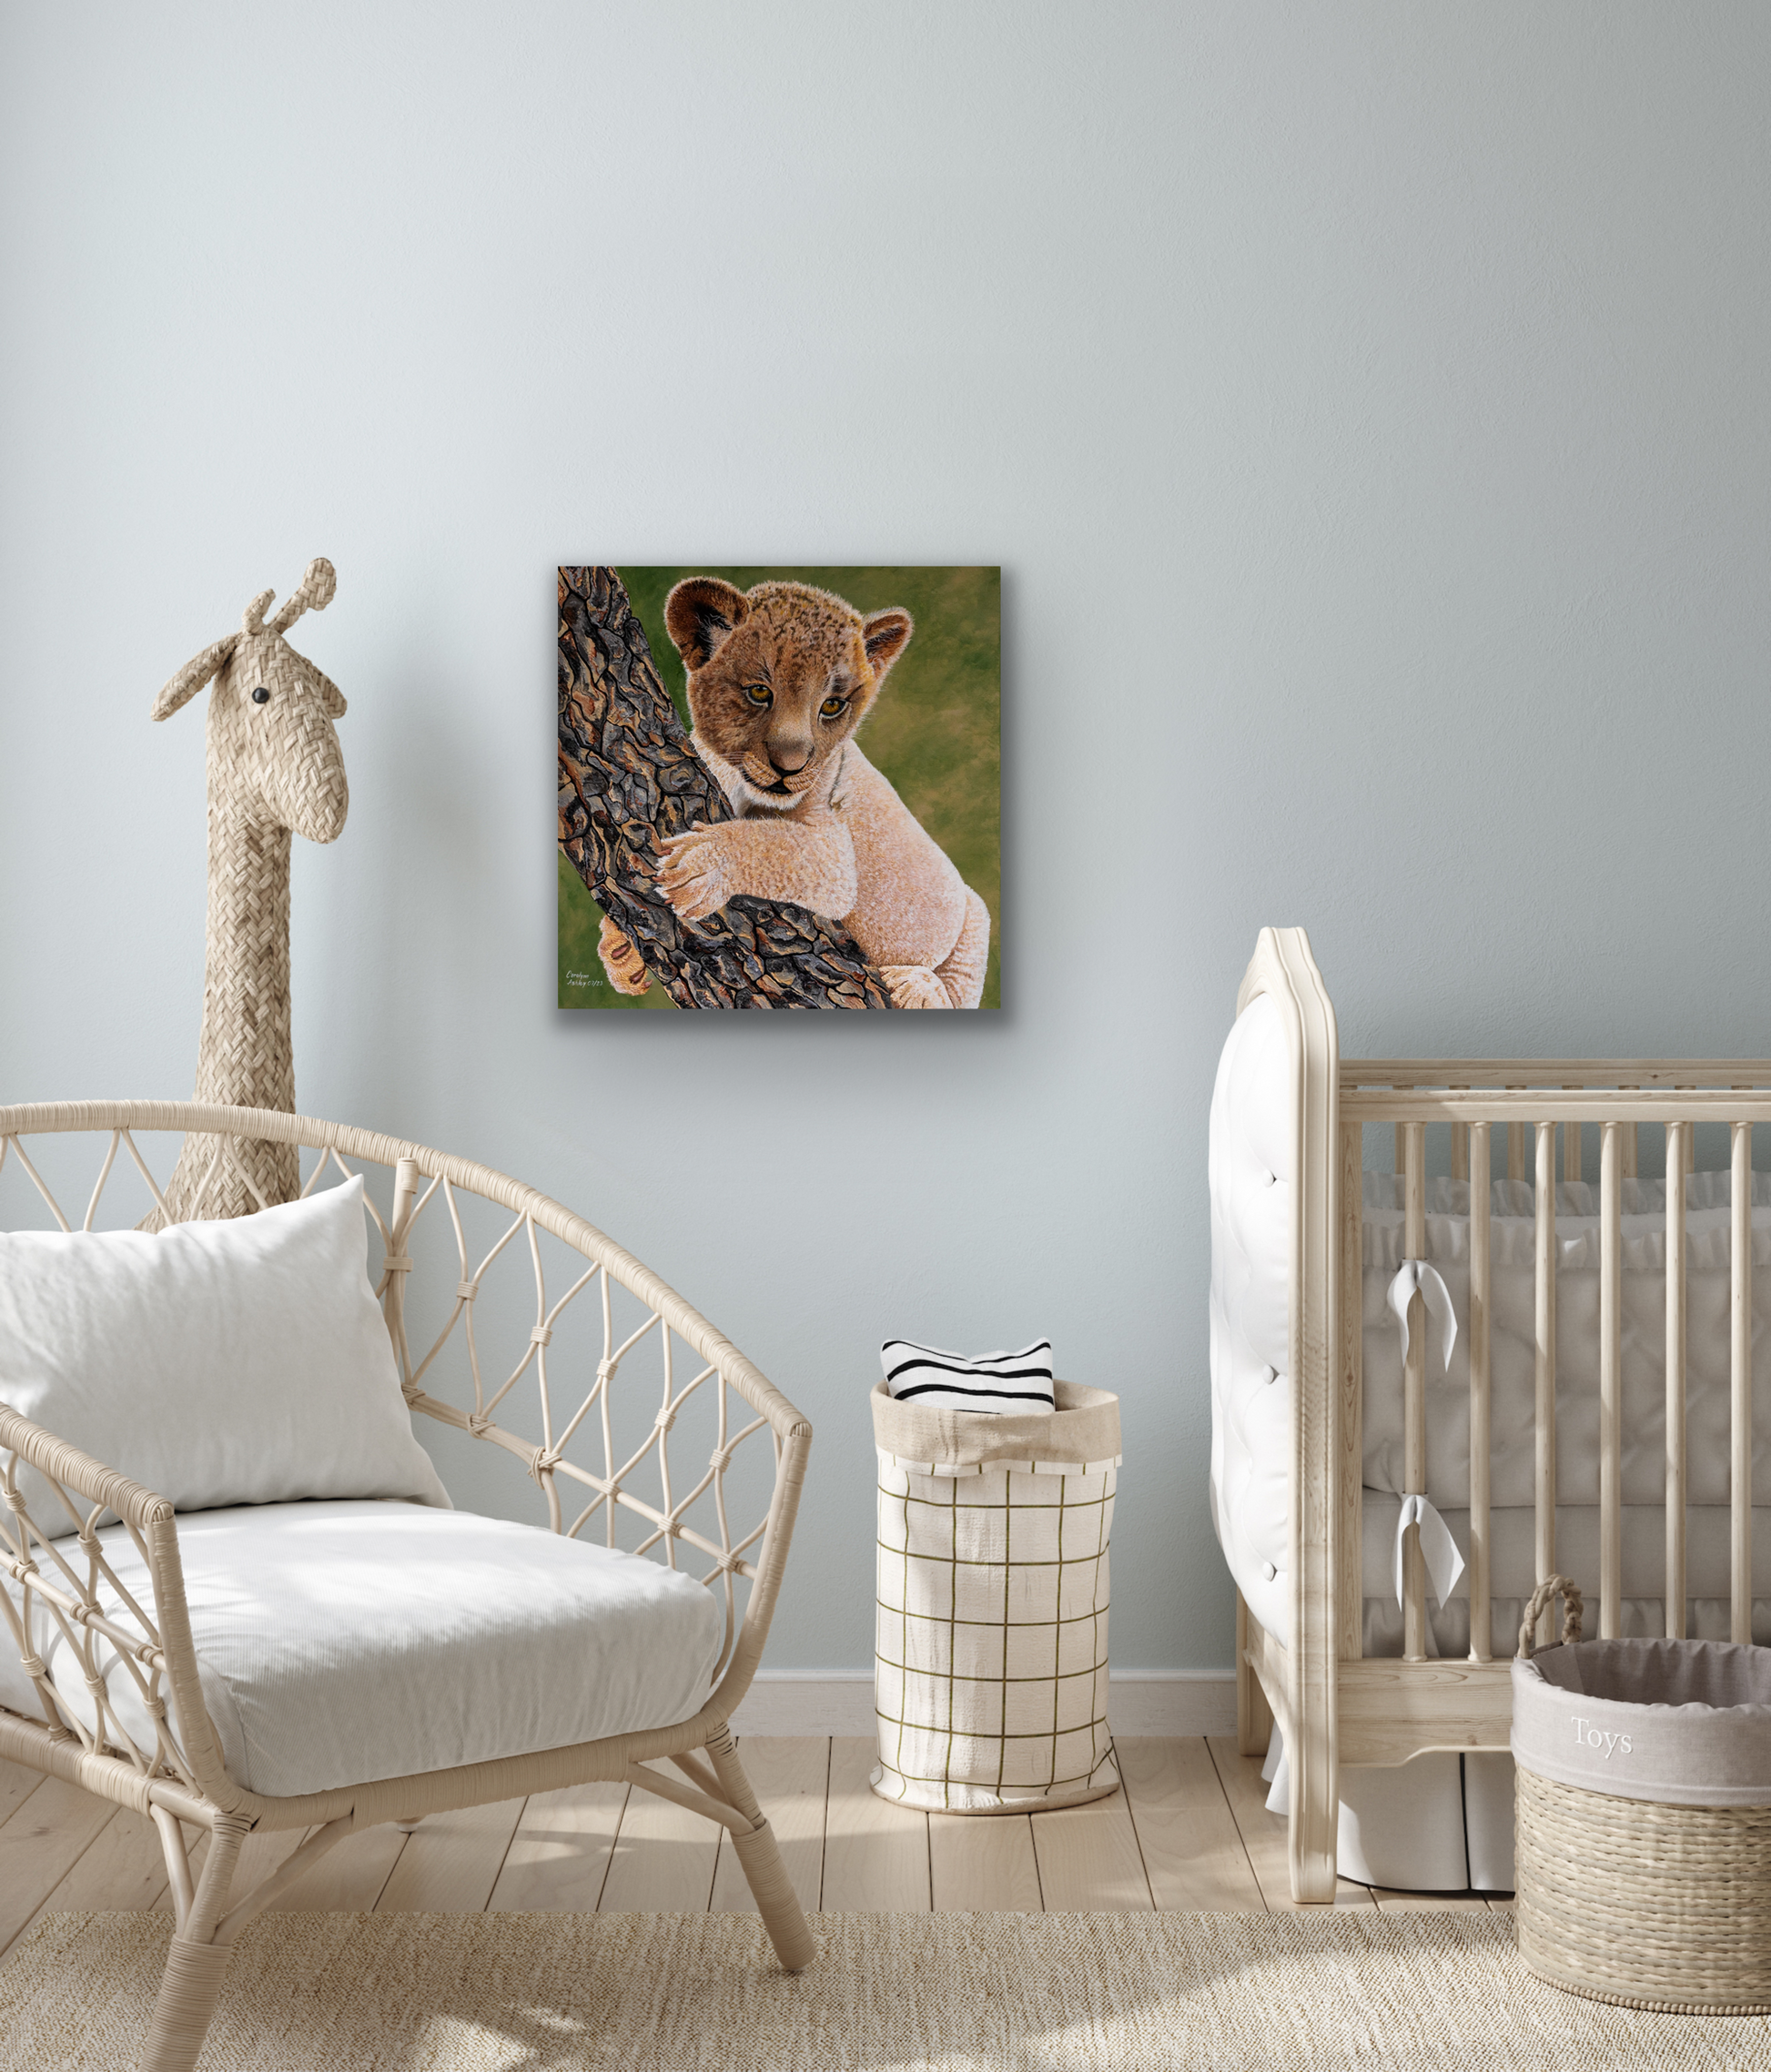 This artwork will look amazing in your nursery or child's room.